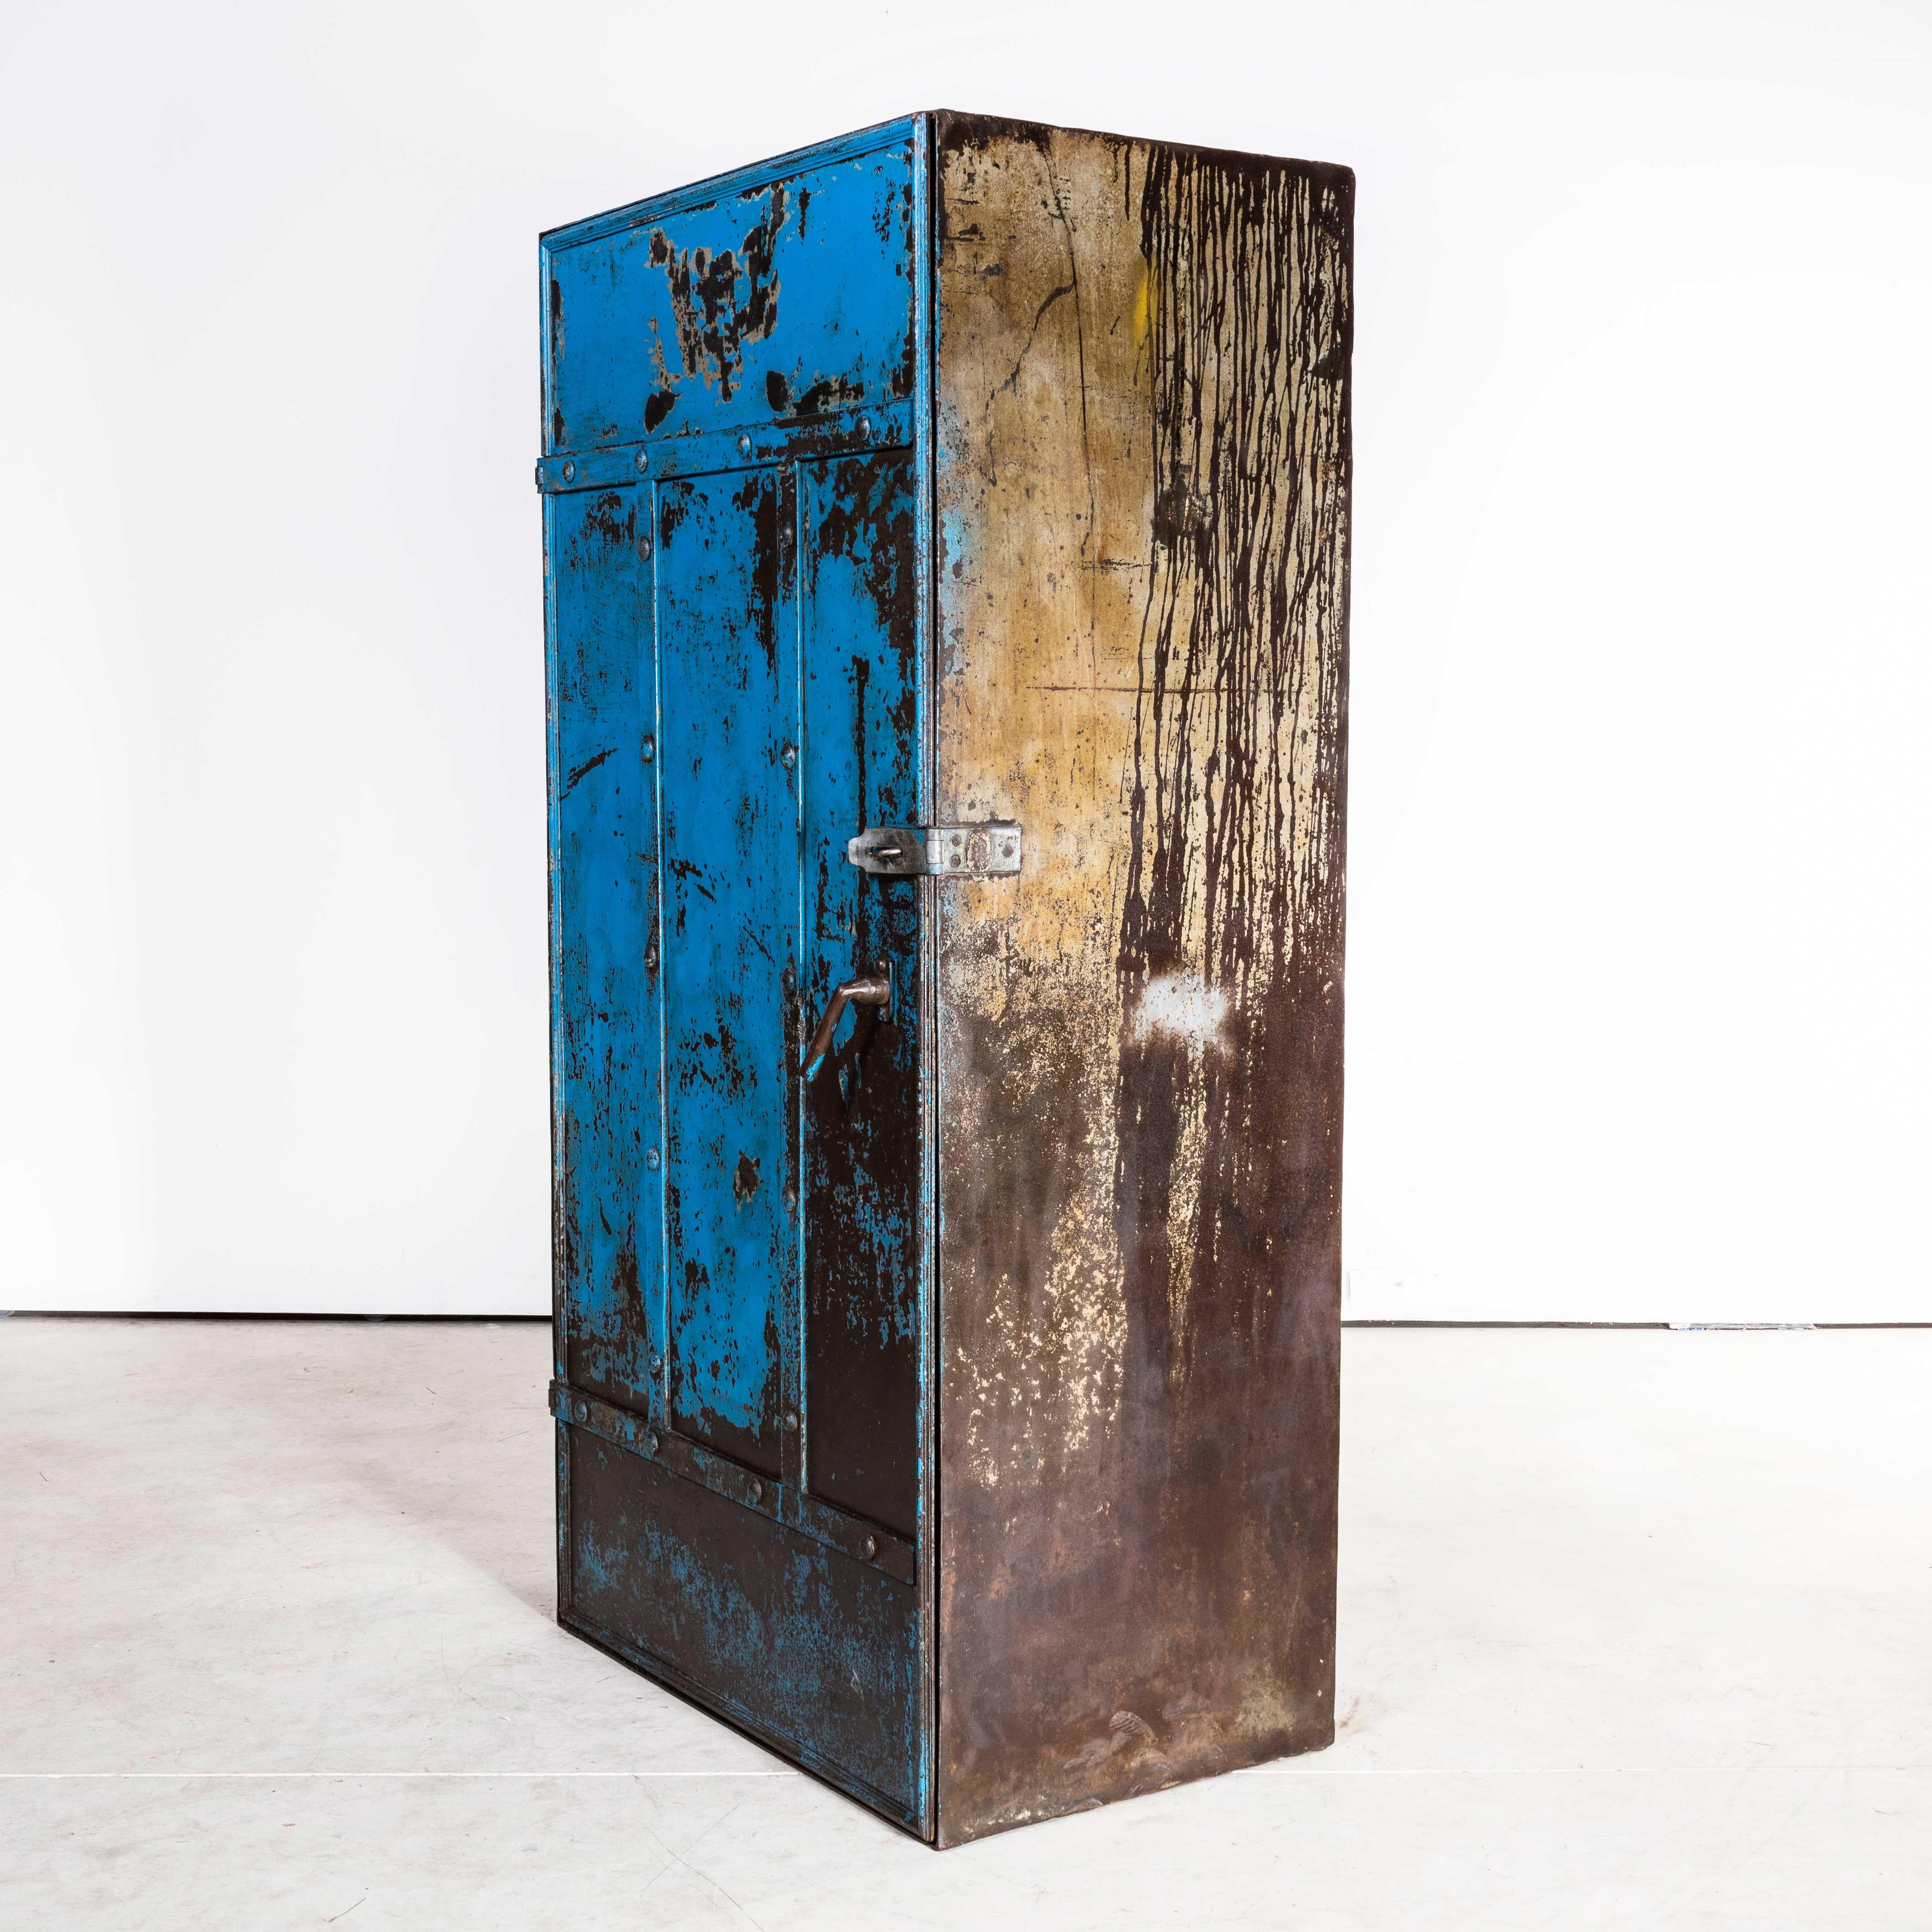 1920s English Industrial Strong Locker
1920s English Industrial Strong Locker – Sourced in Lancashire from a machine parts tool maker it is a heavy secure cabinet used to hold master tool guides. The door has heavy duty steel strapping and the